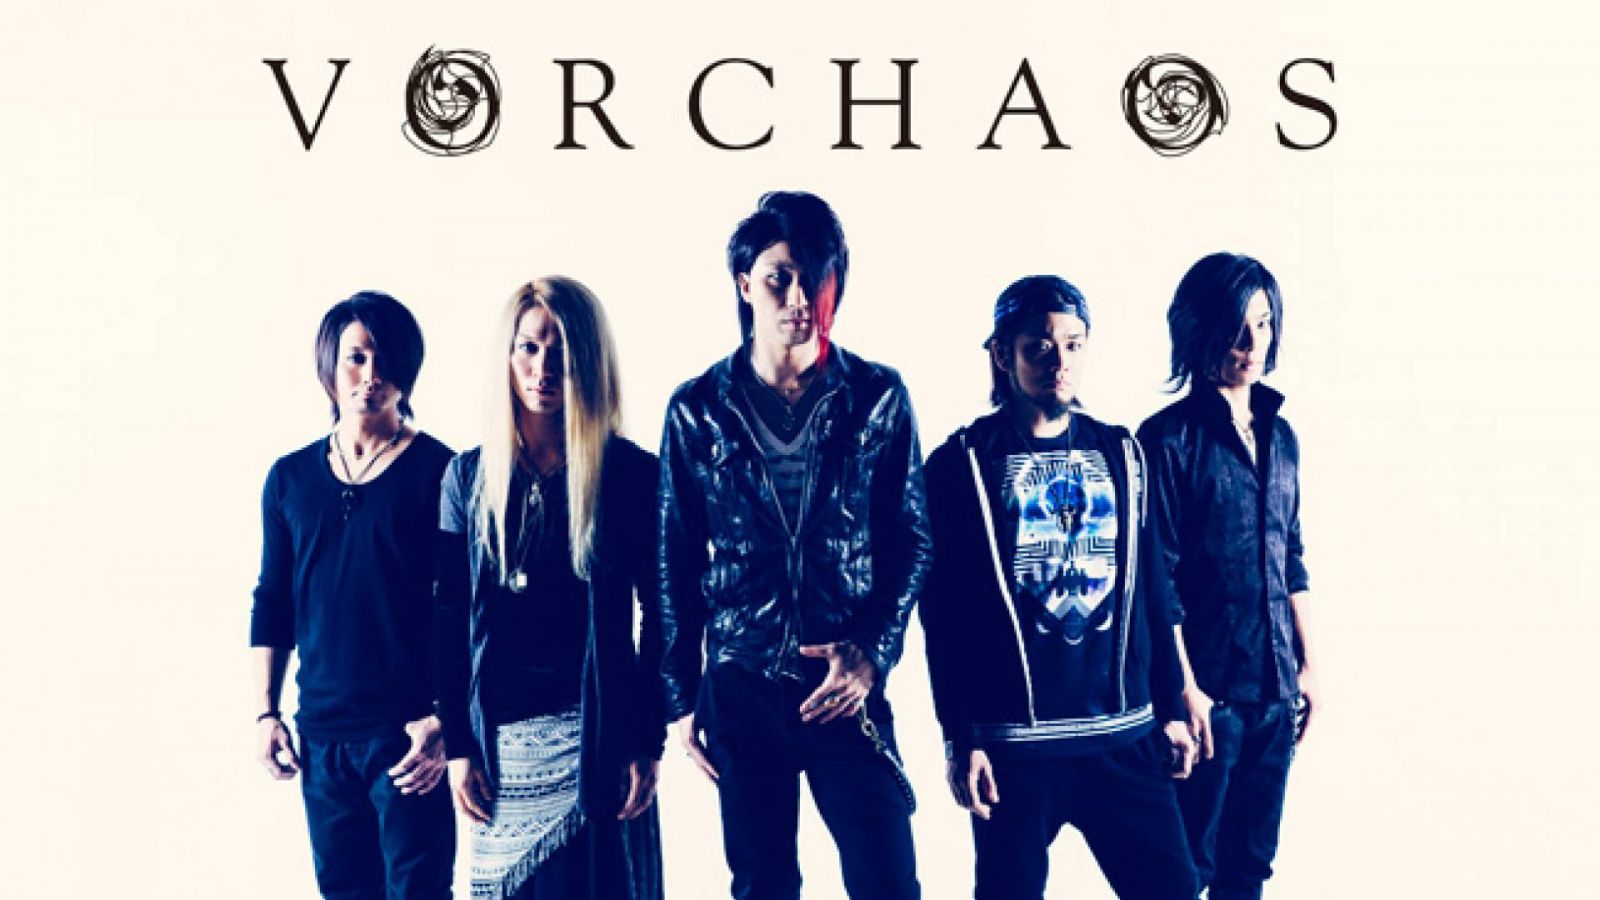 Nowy singiel Vorchaos © 2018 Vorchaos. Provided by A-Line Music.